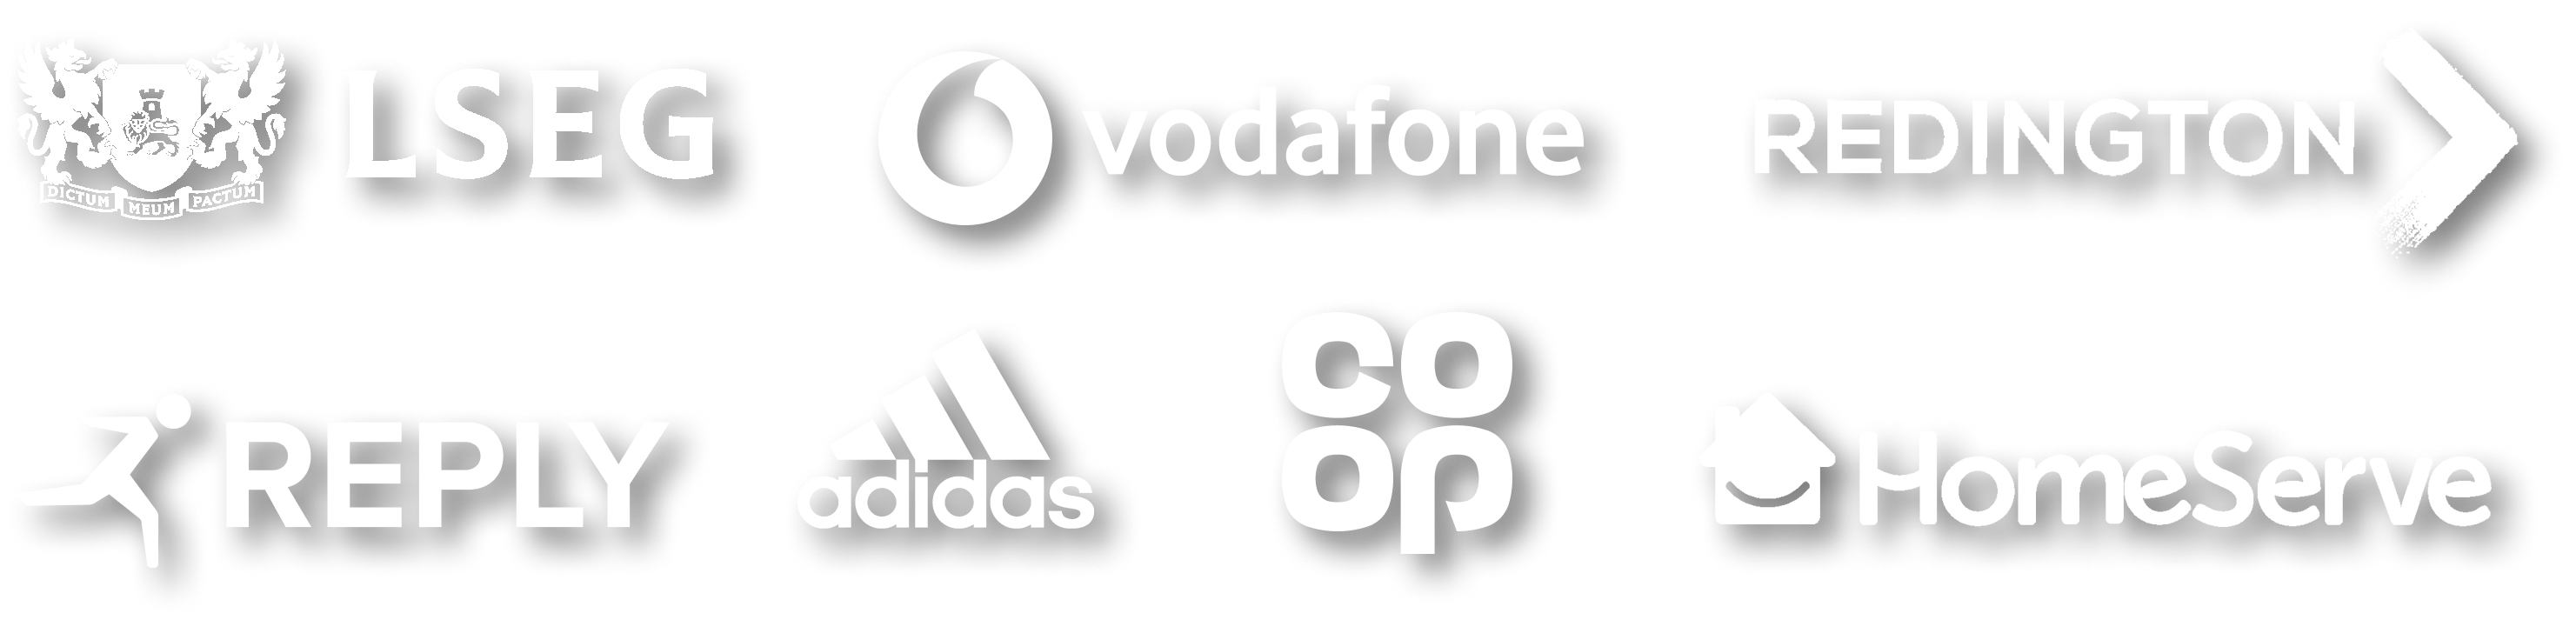 Client list: London Stock Exchange Group, Vodafone, Redington Ltd, Adidas, The Co-operative Group, Homeserve, Reply Agency